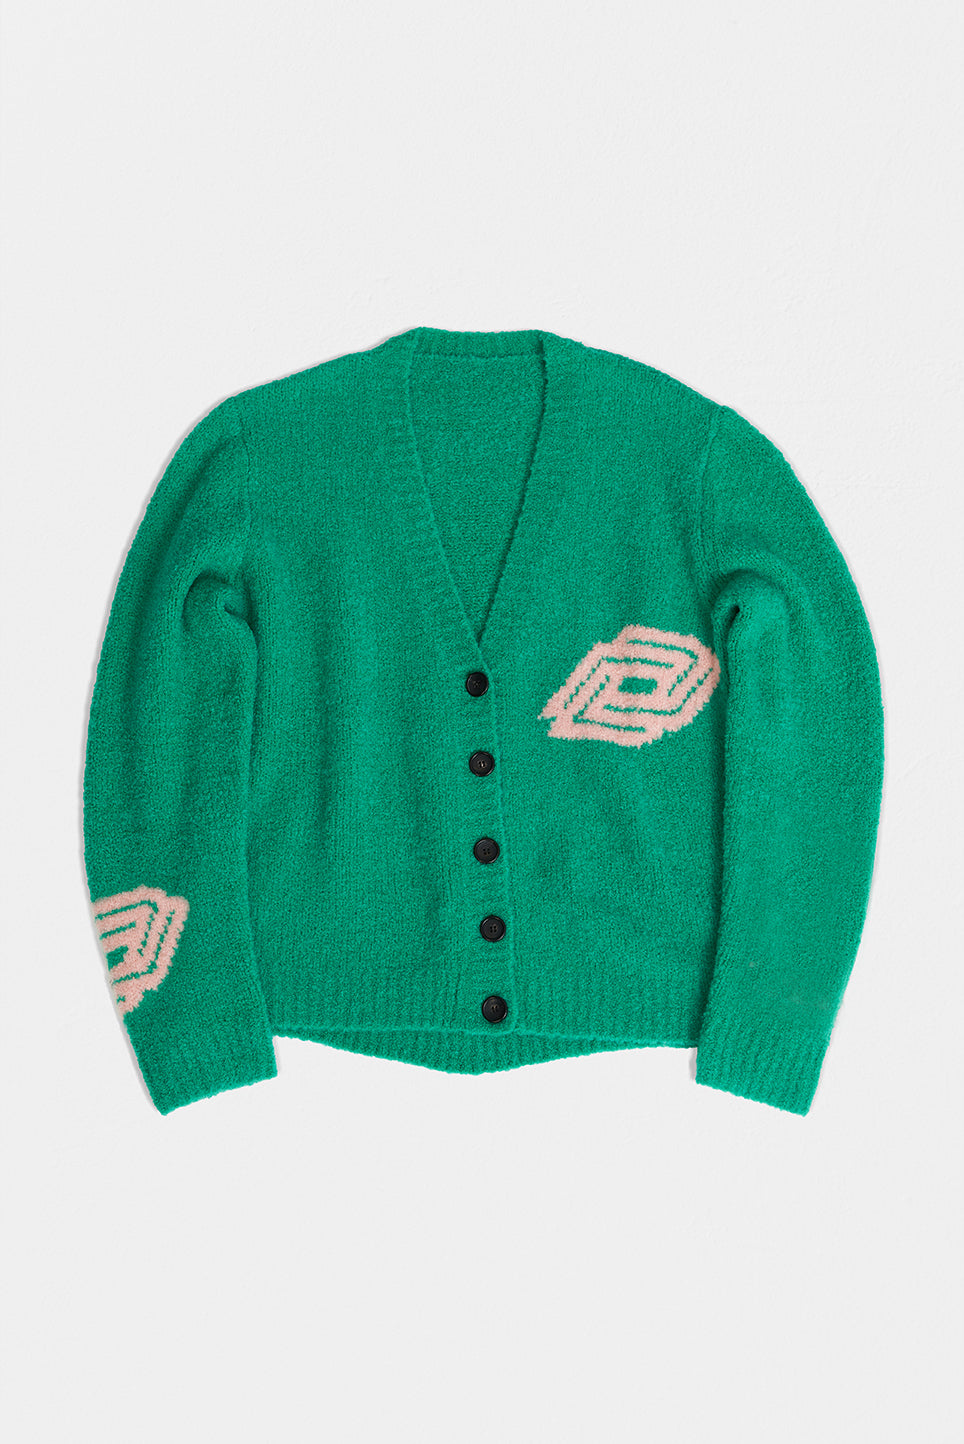 due diligence green knitted cardigan